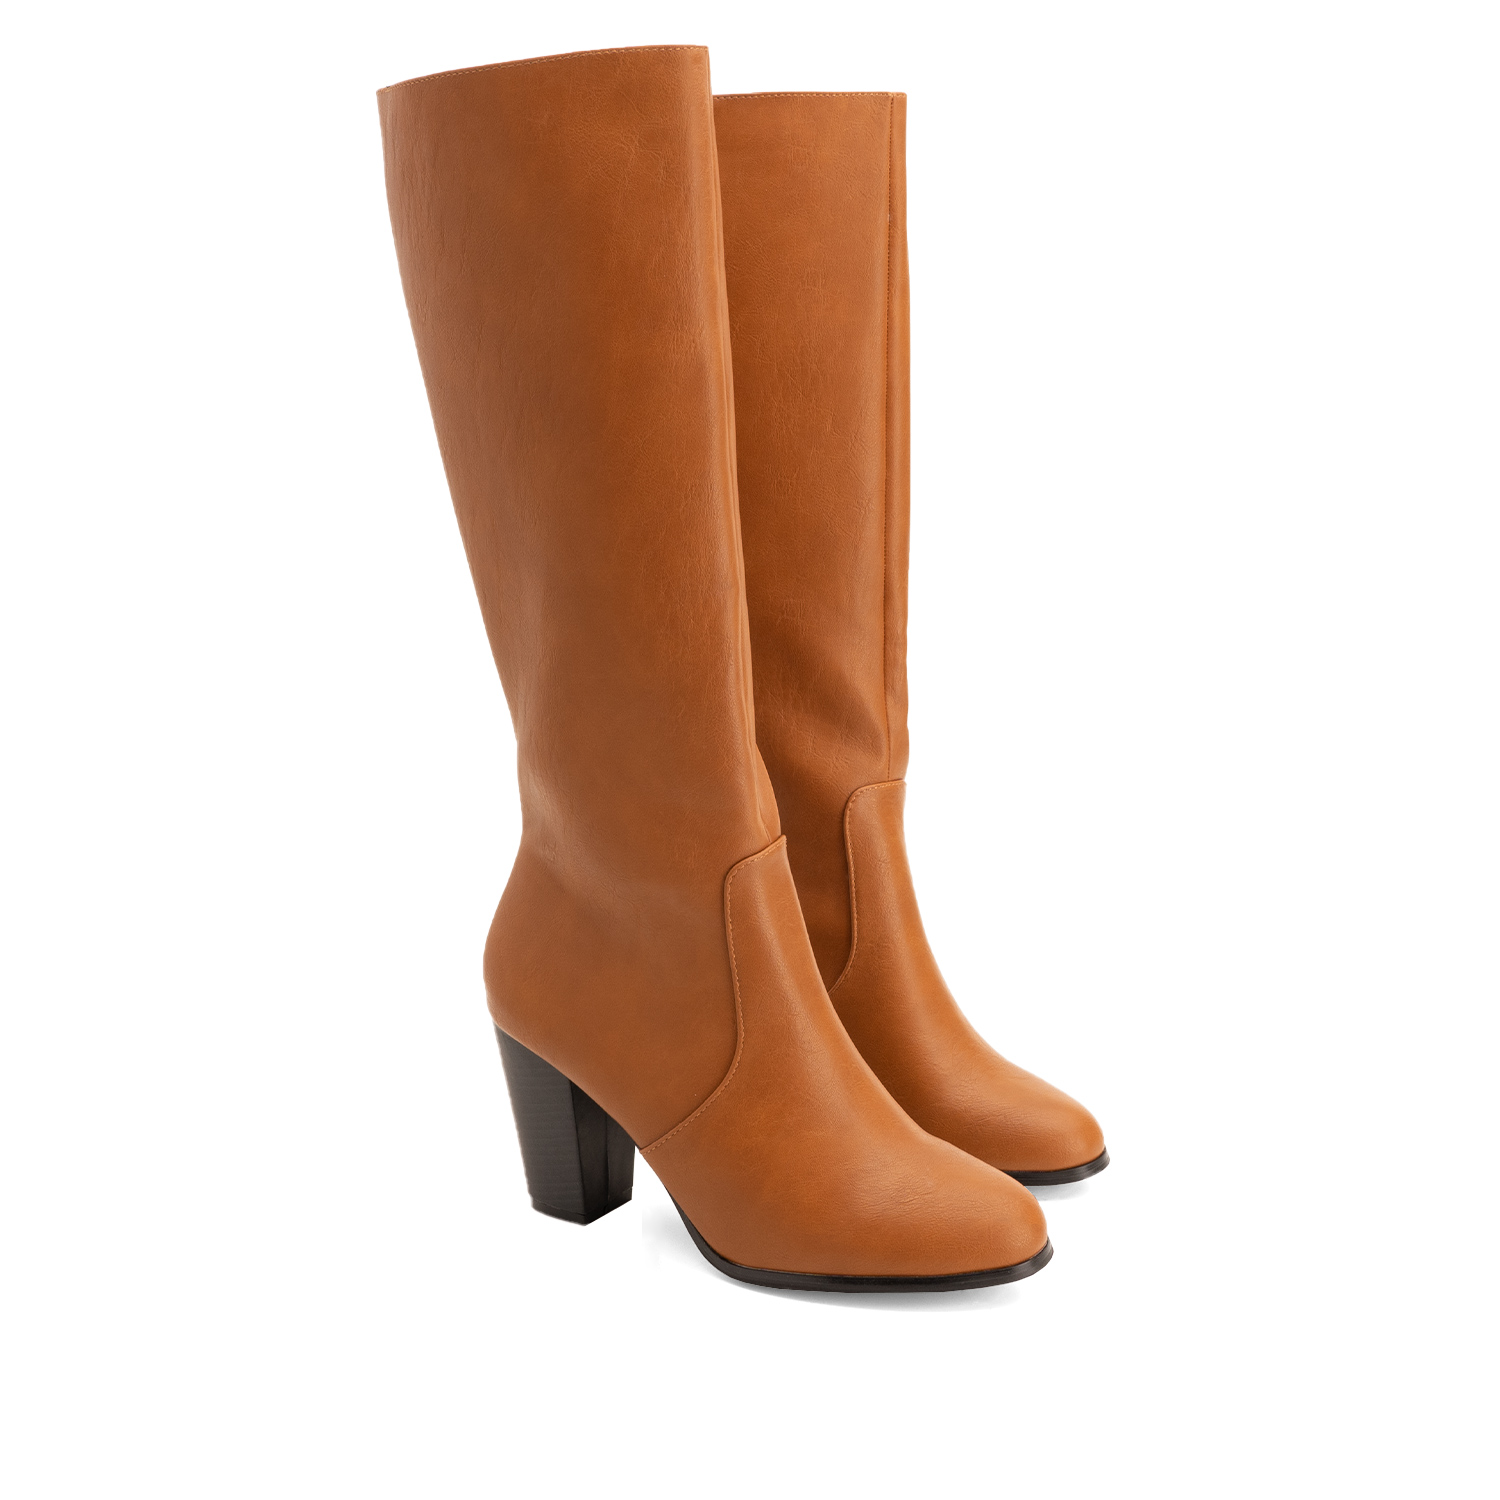 Heeled knee-high-calf boots in camel faux leather 